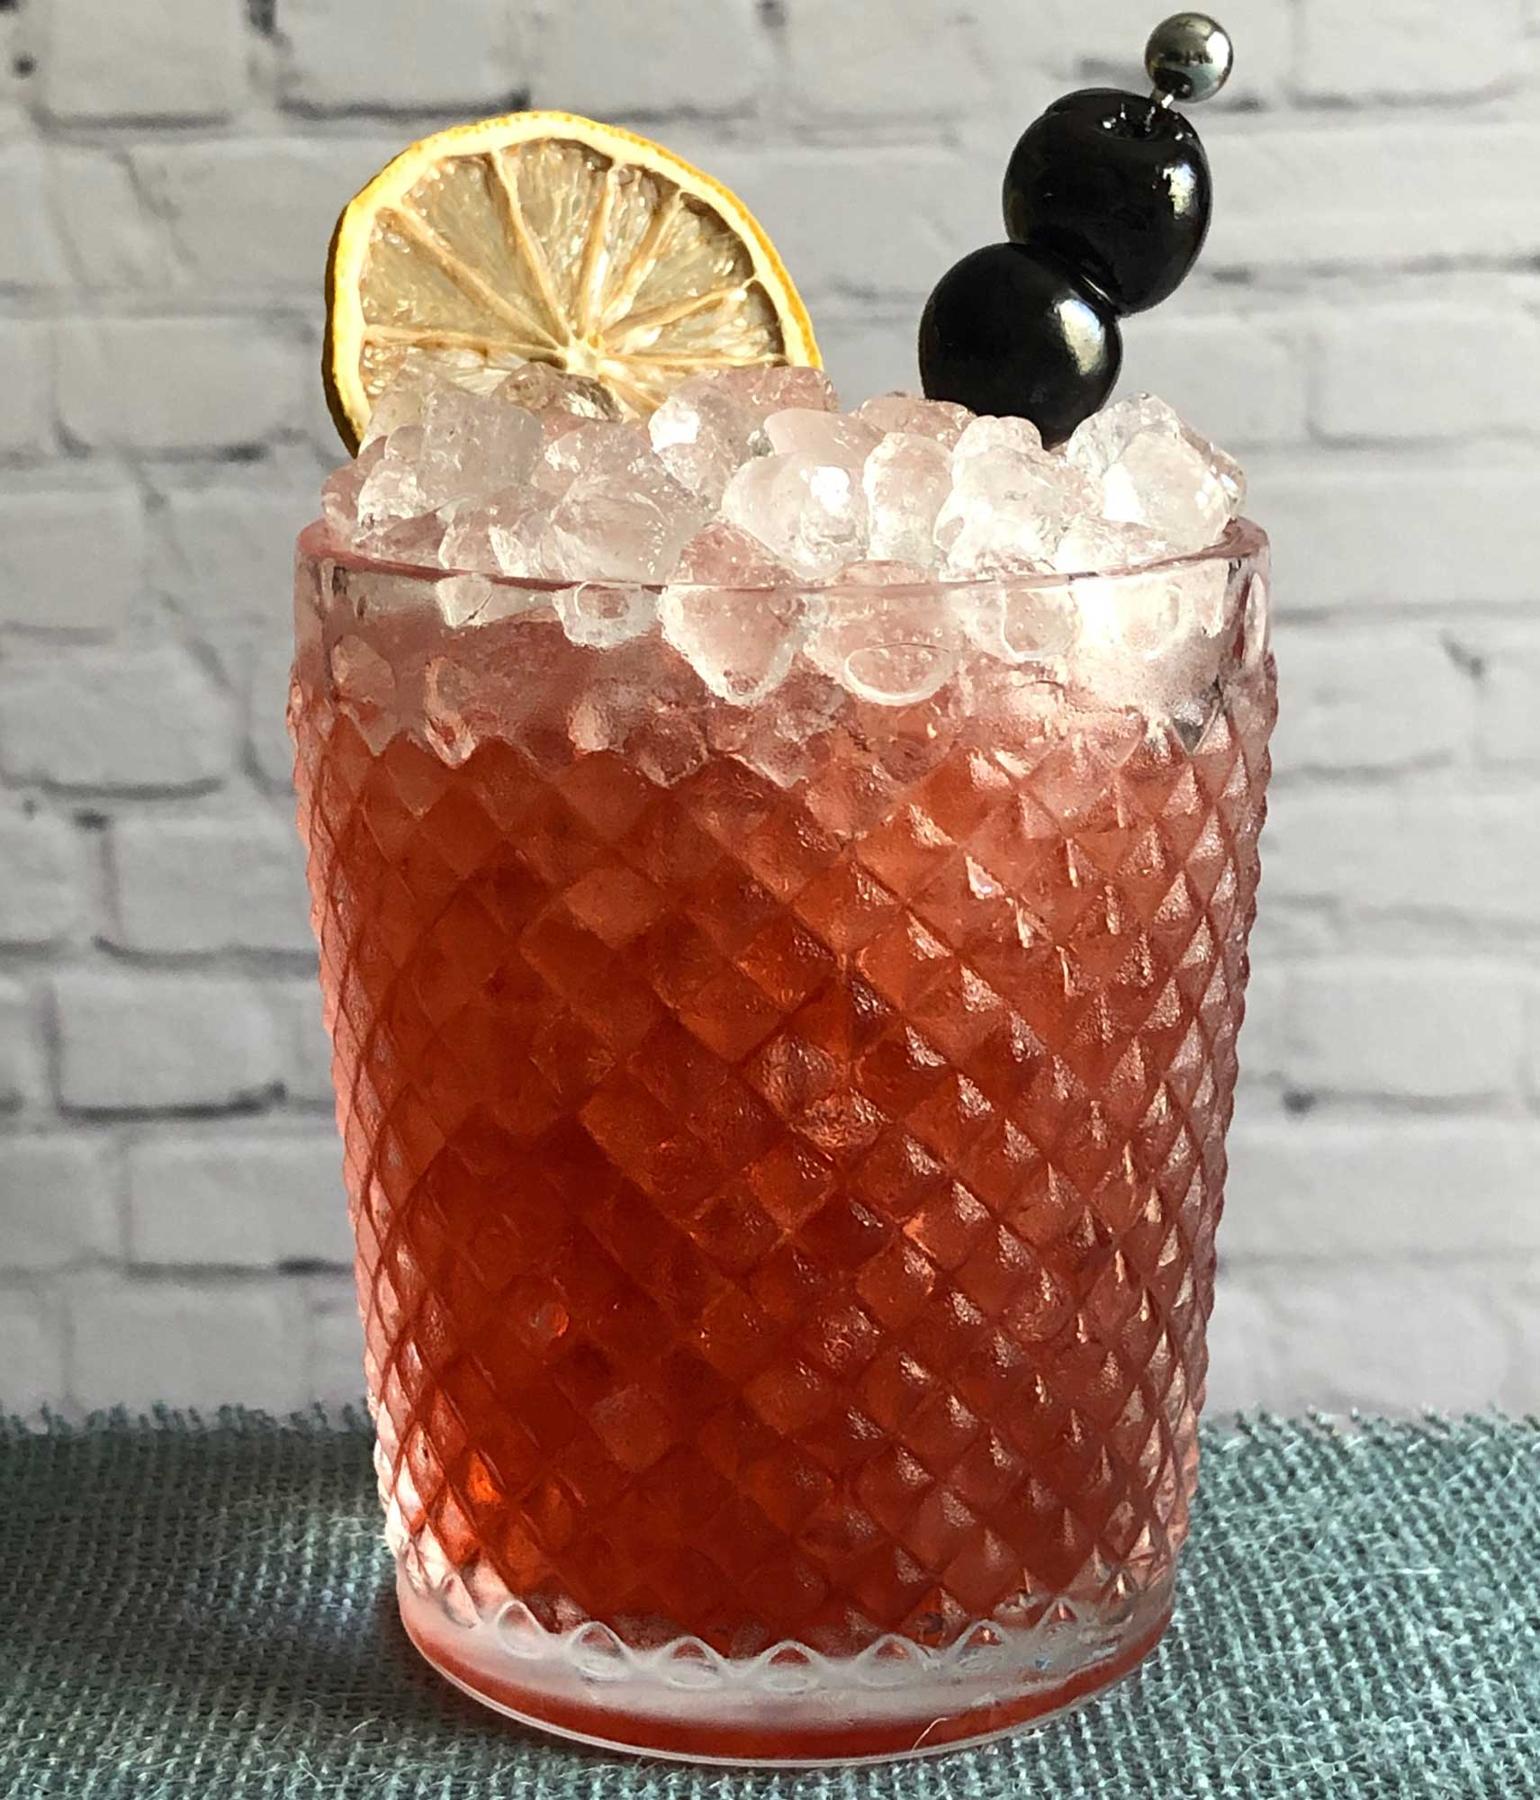 An example of the Cheerwine Swizzle, the mixed drink (drink), by David Burnette, South on Main, Little Rock, Arkansas, featuring Cheerwine, Dolin Génépy le Chamois Liqueur, and lemon juice; photo by Lee Edwards